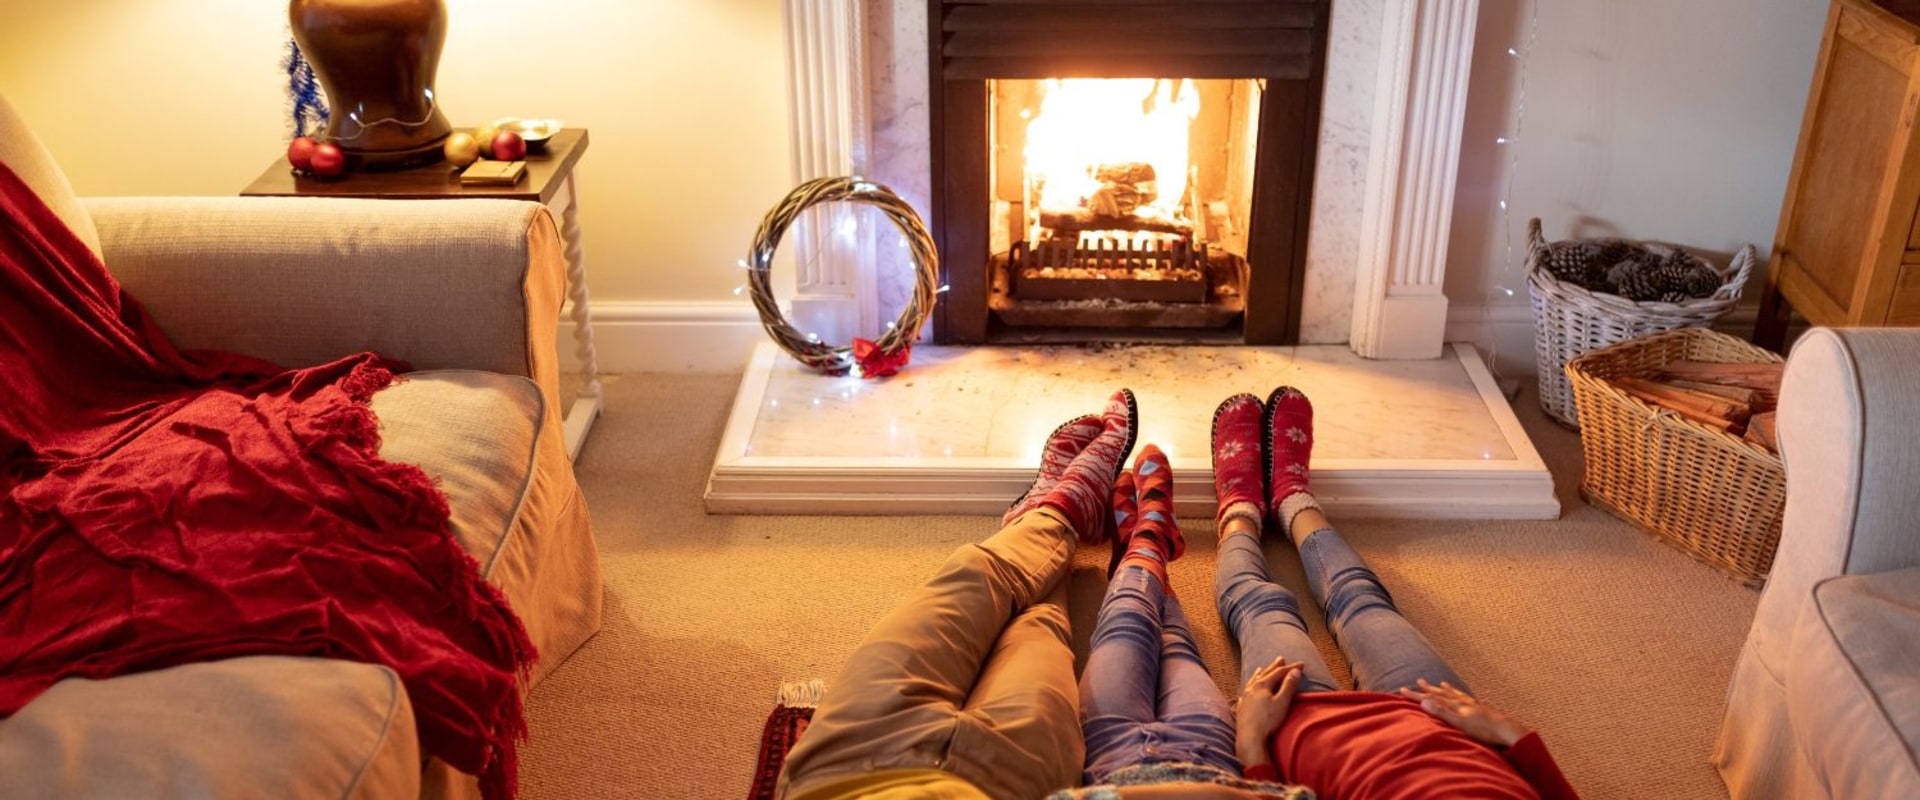 A Comprehensive Checklist for Preparing Your Home for Winter